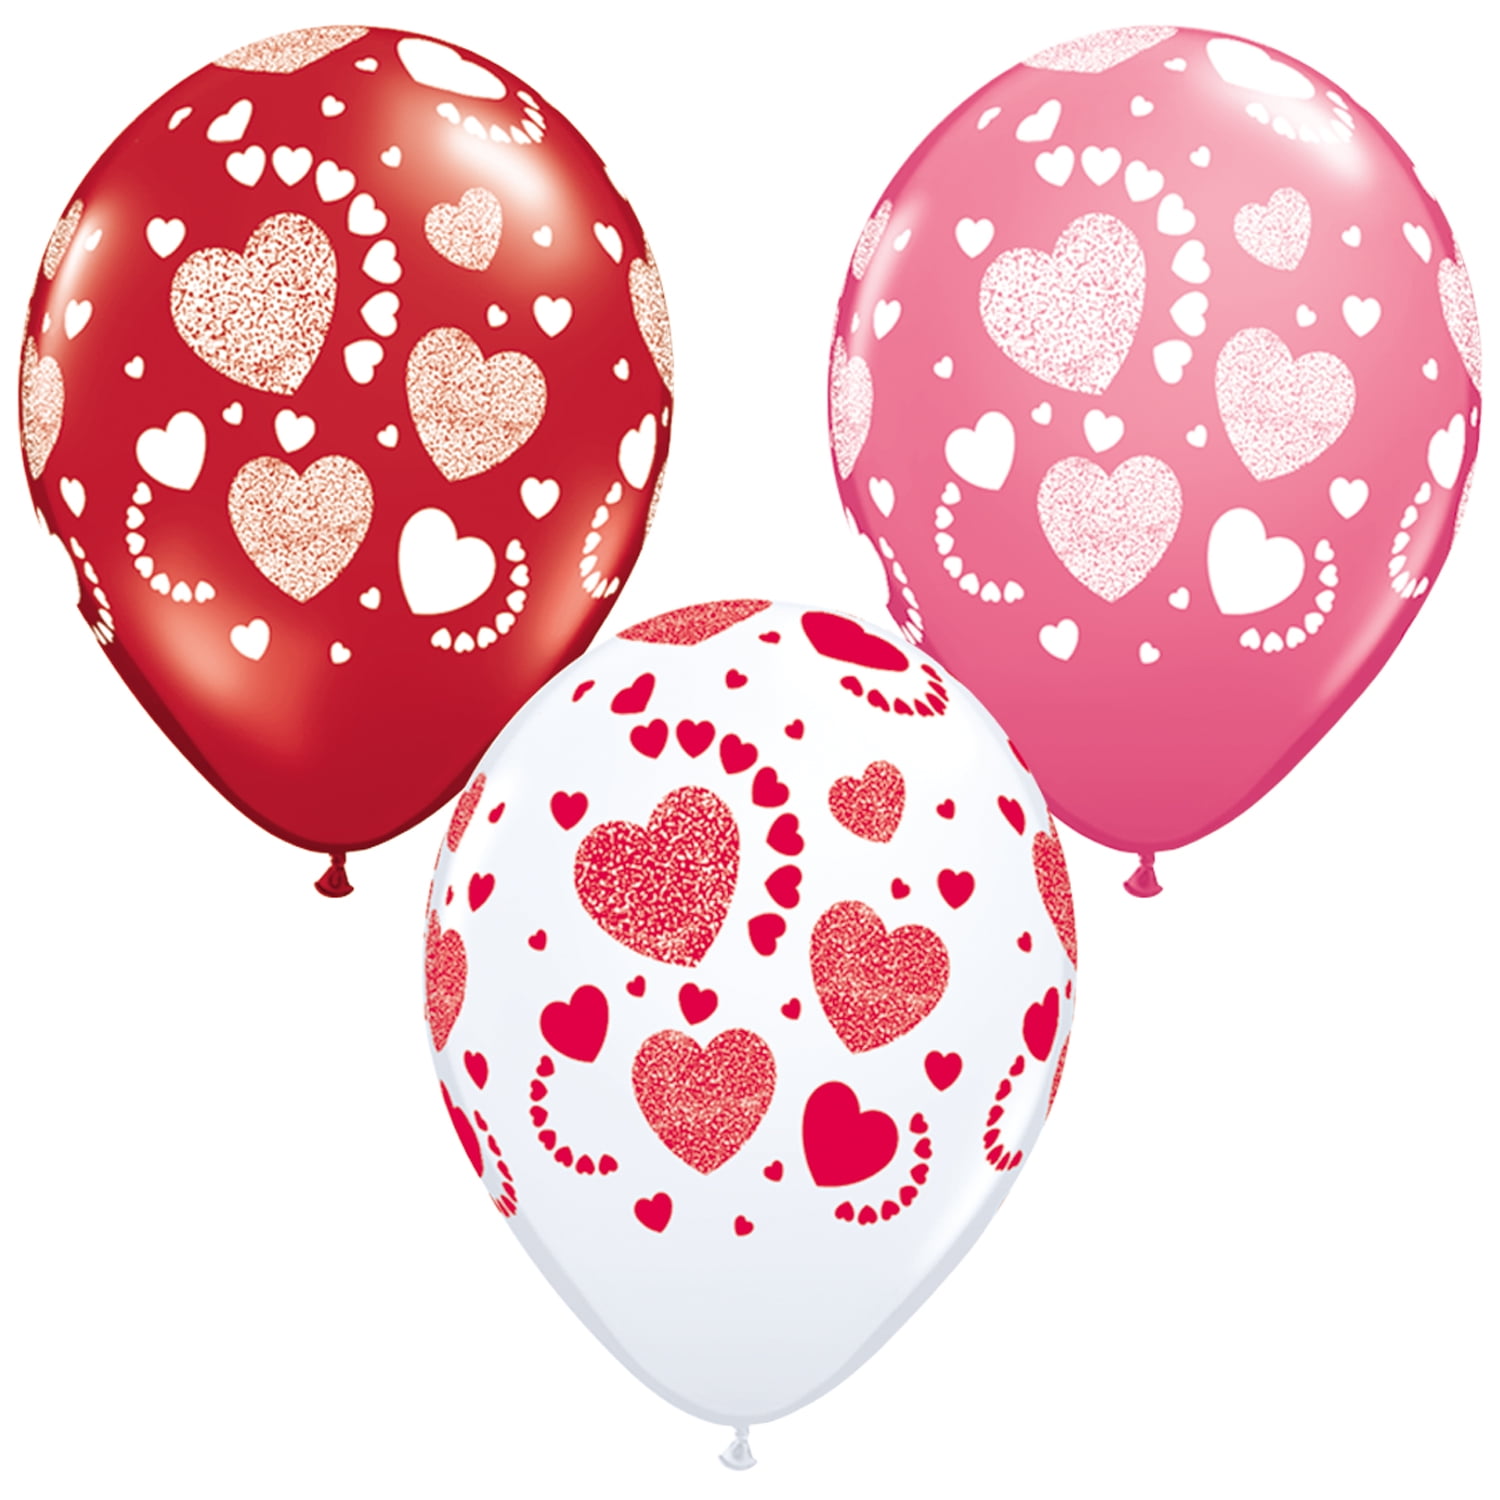 11" Heart Latex Balloons Qualatex Helium Quality Wedding Party Decorations 